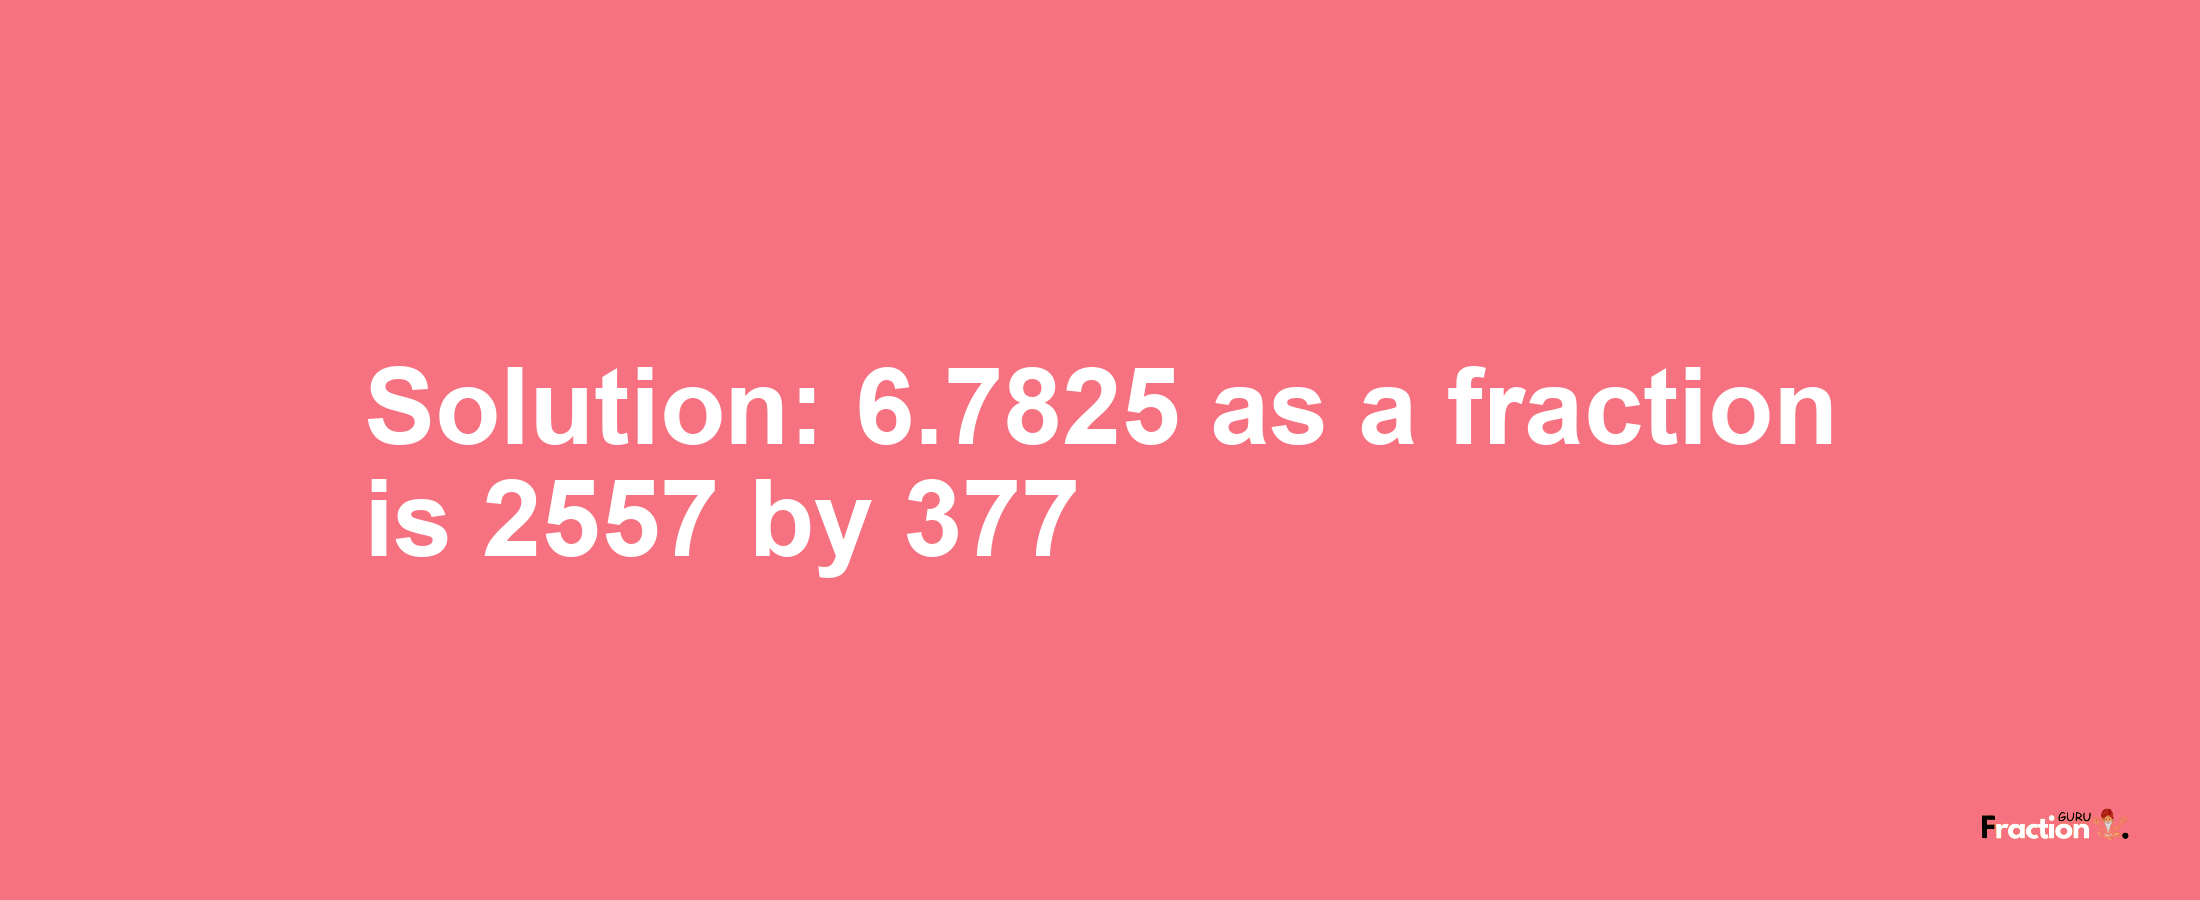 Solution:6.7825 as a fraction is 2557/377